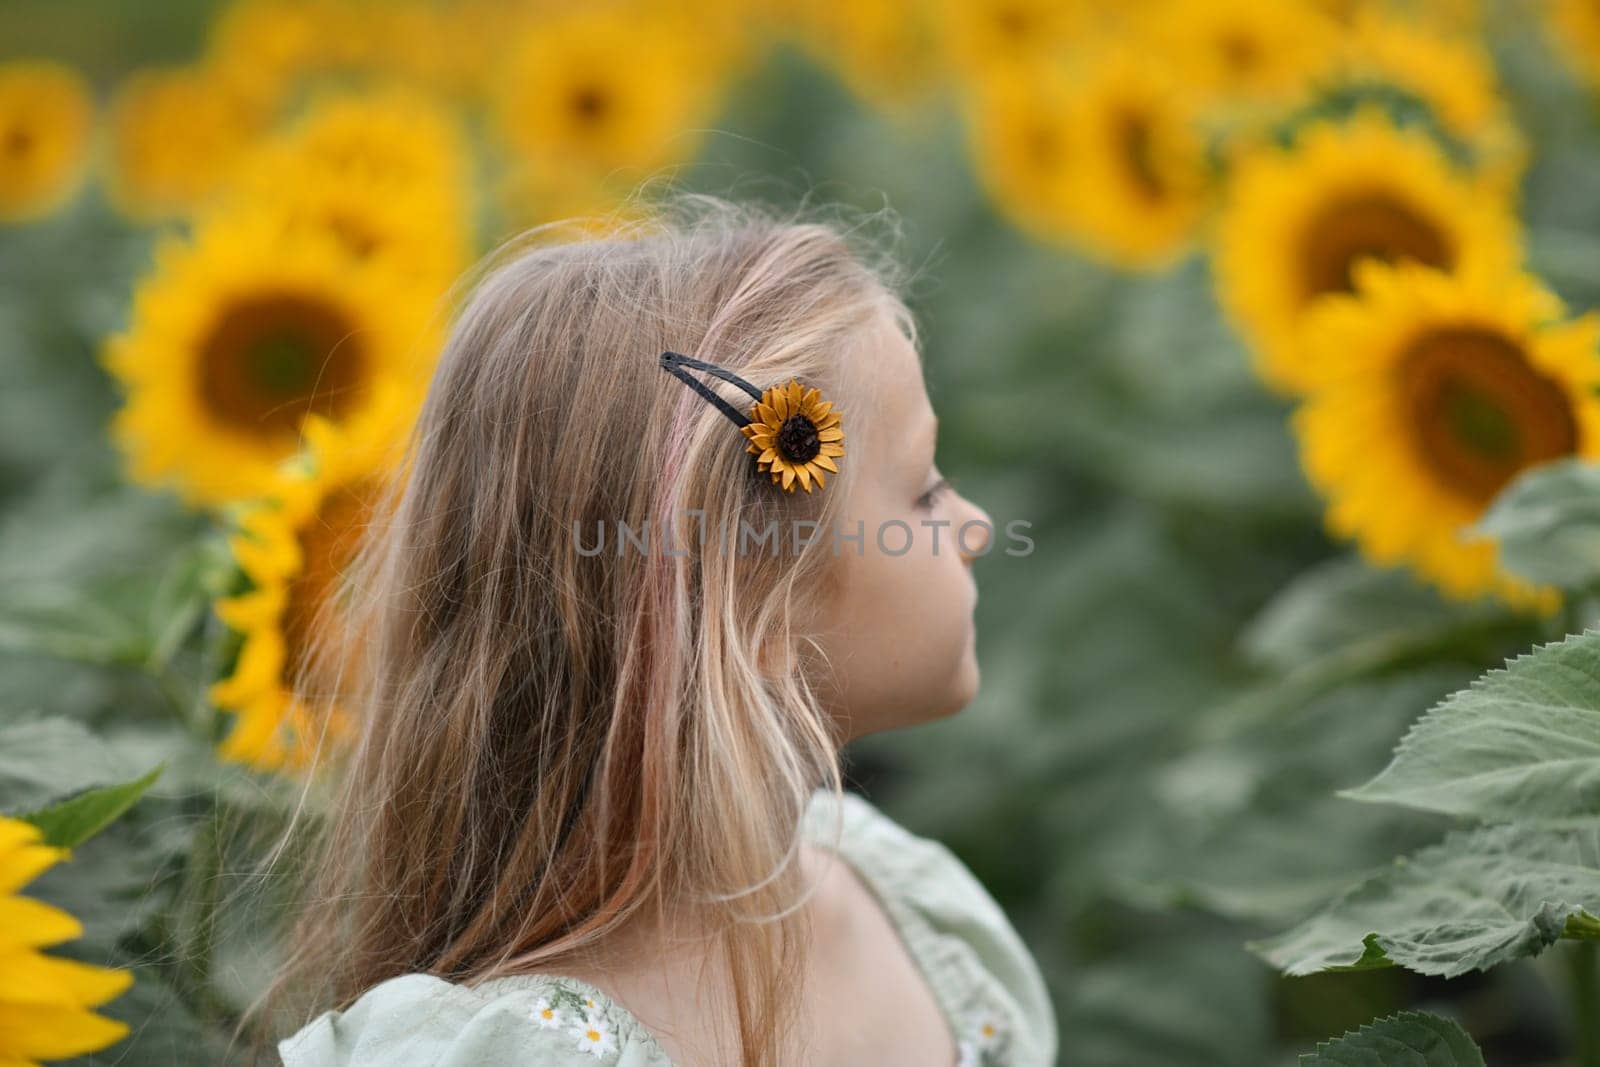 A girl in a dress enjoys life in a field with the sunflowers by Godi